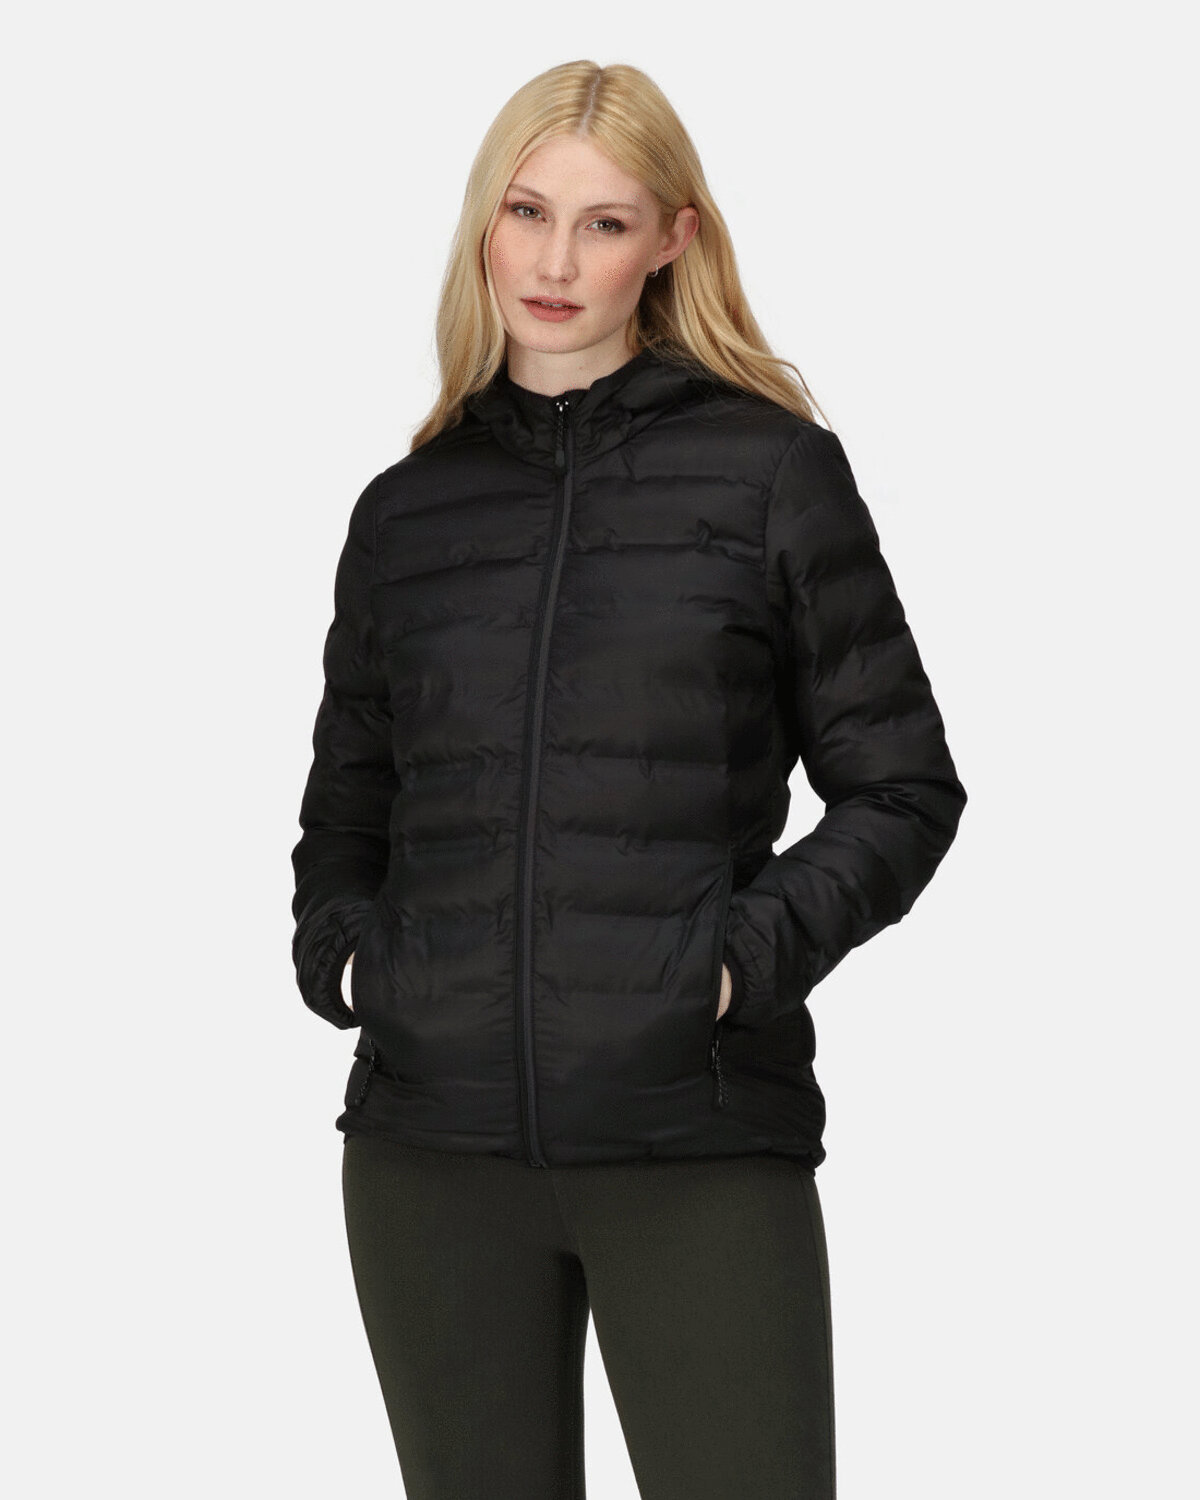 LADIES ICEFALL INSULATED JACKET